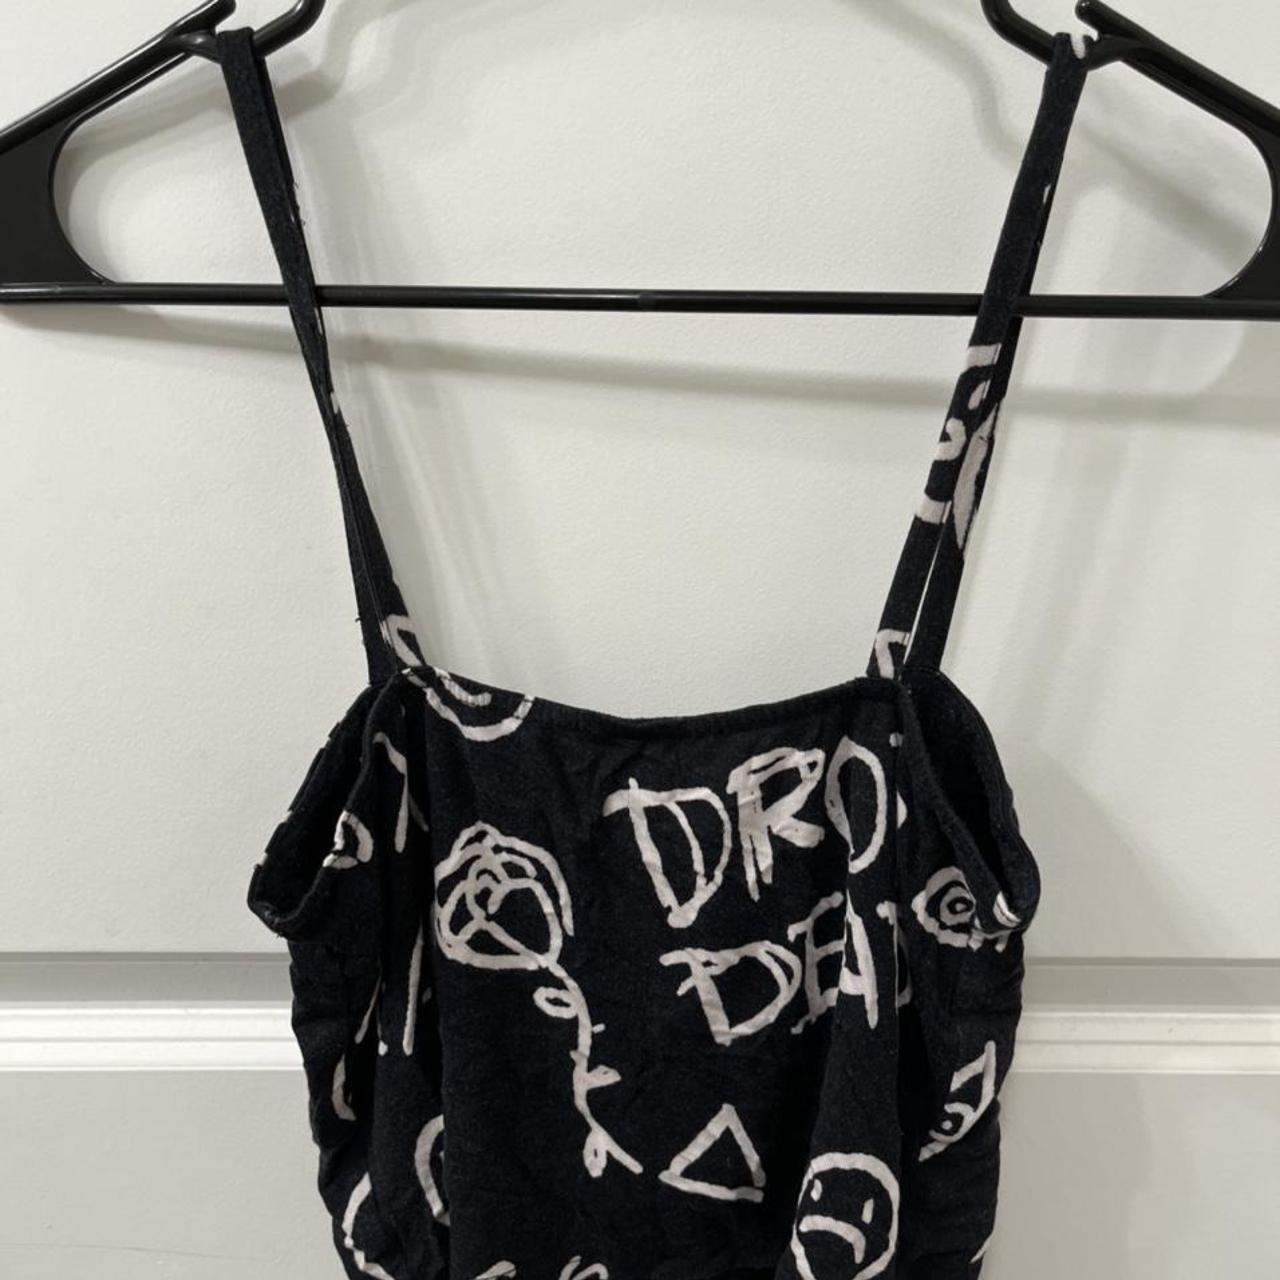 Dropdead Women's Black and White Crop-top (3)